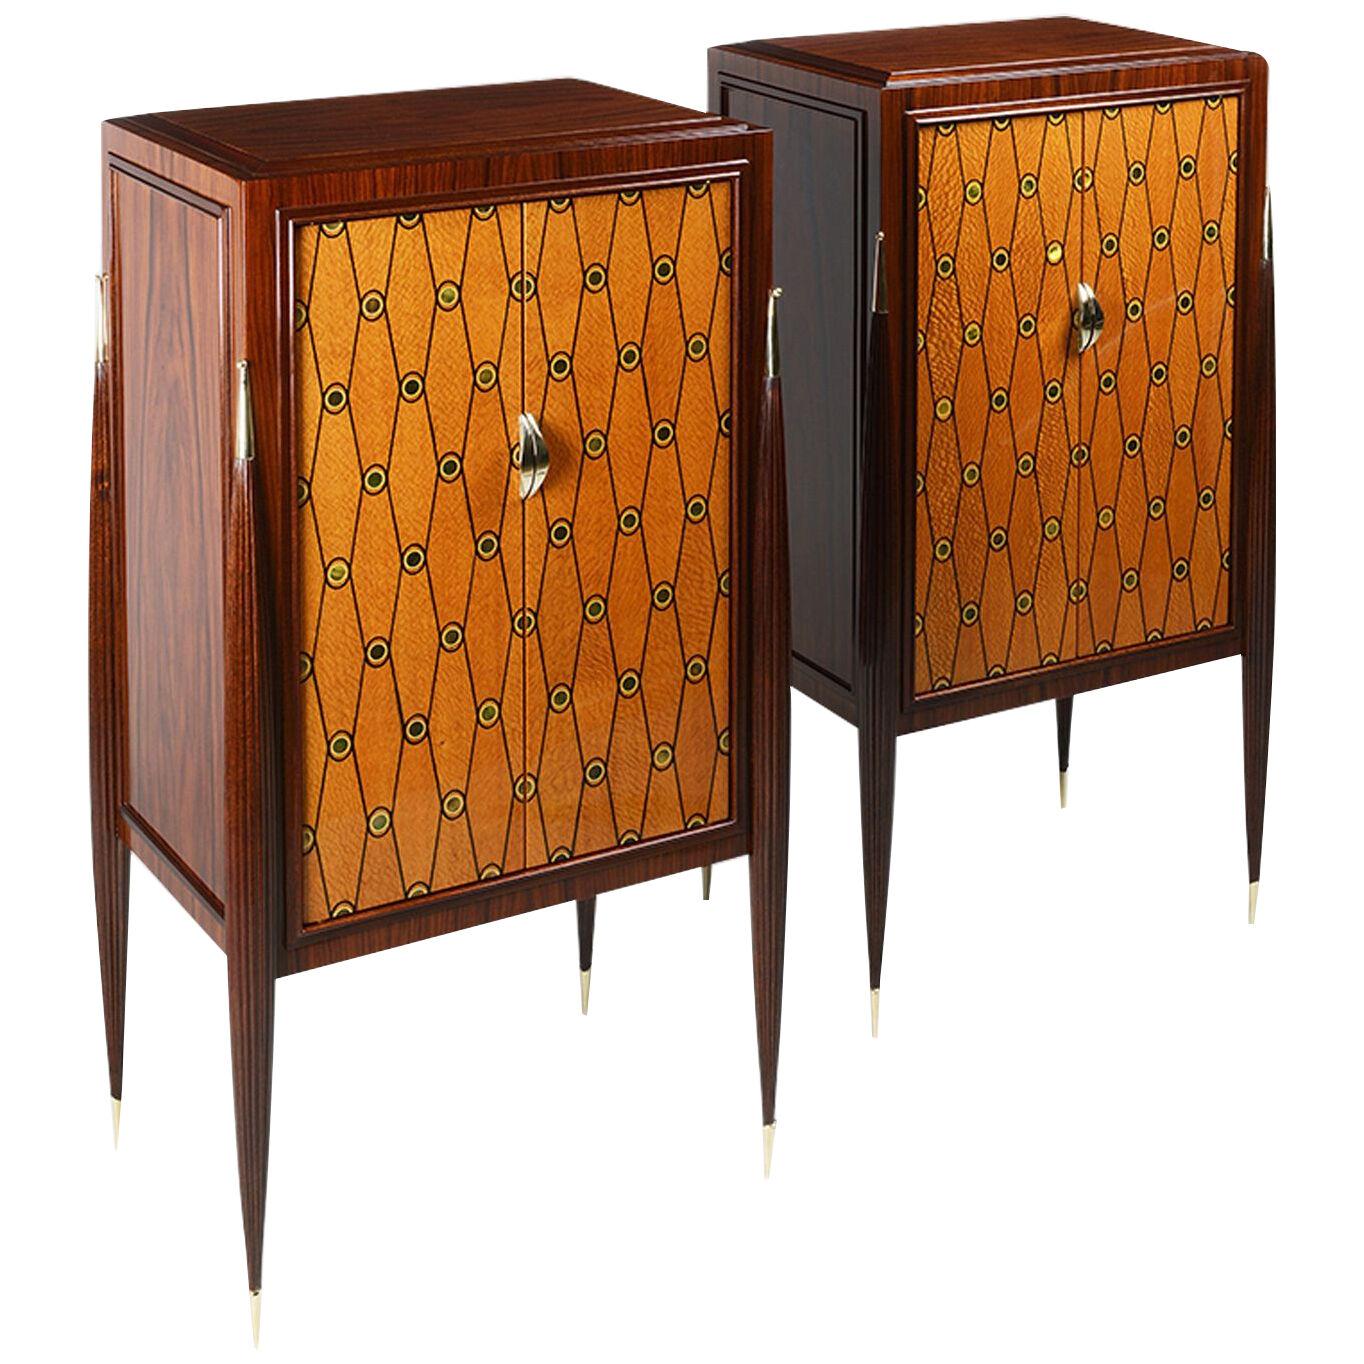 Pair of French Art Deco inspired Cabinets